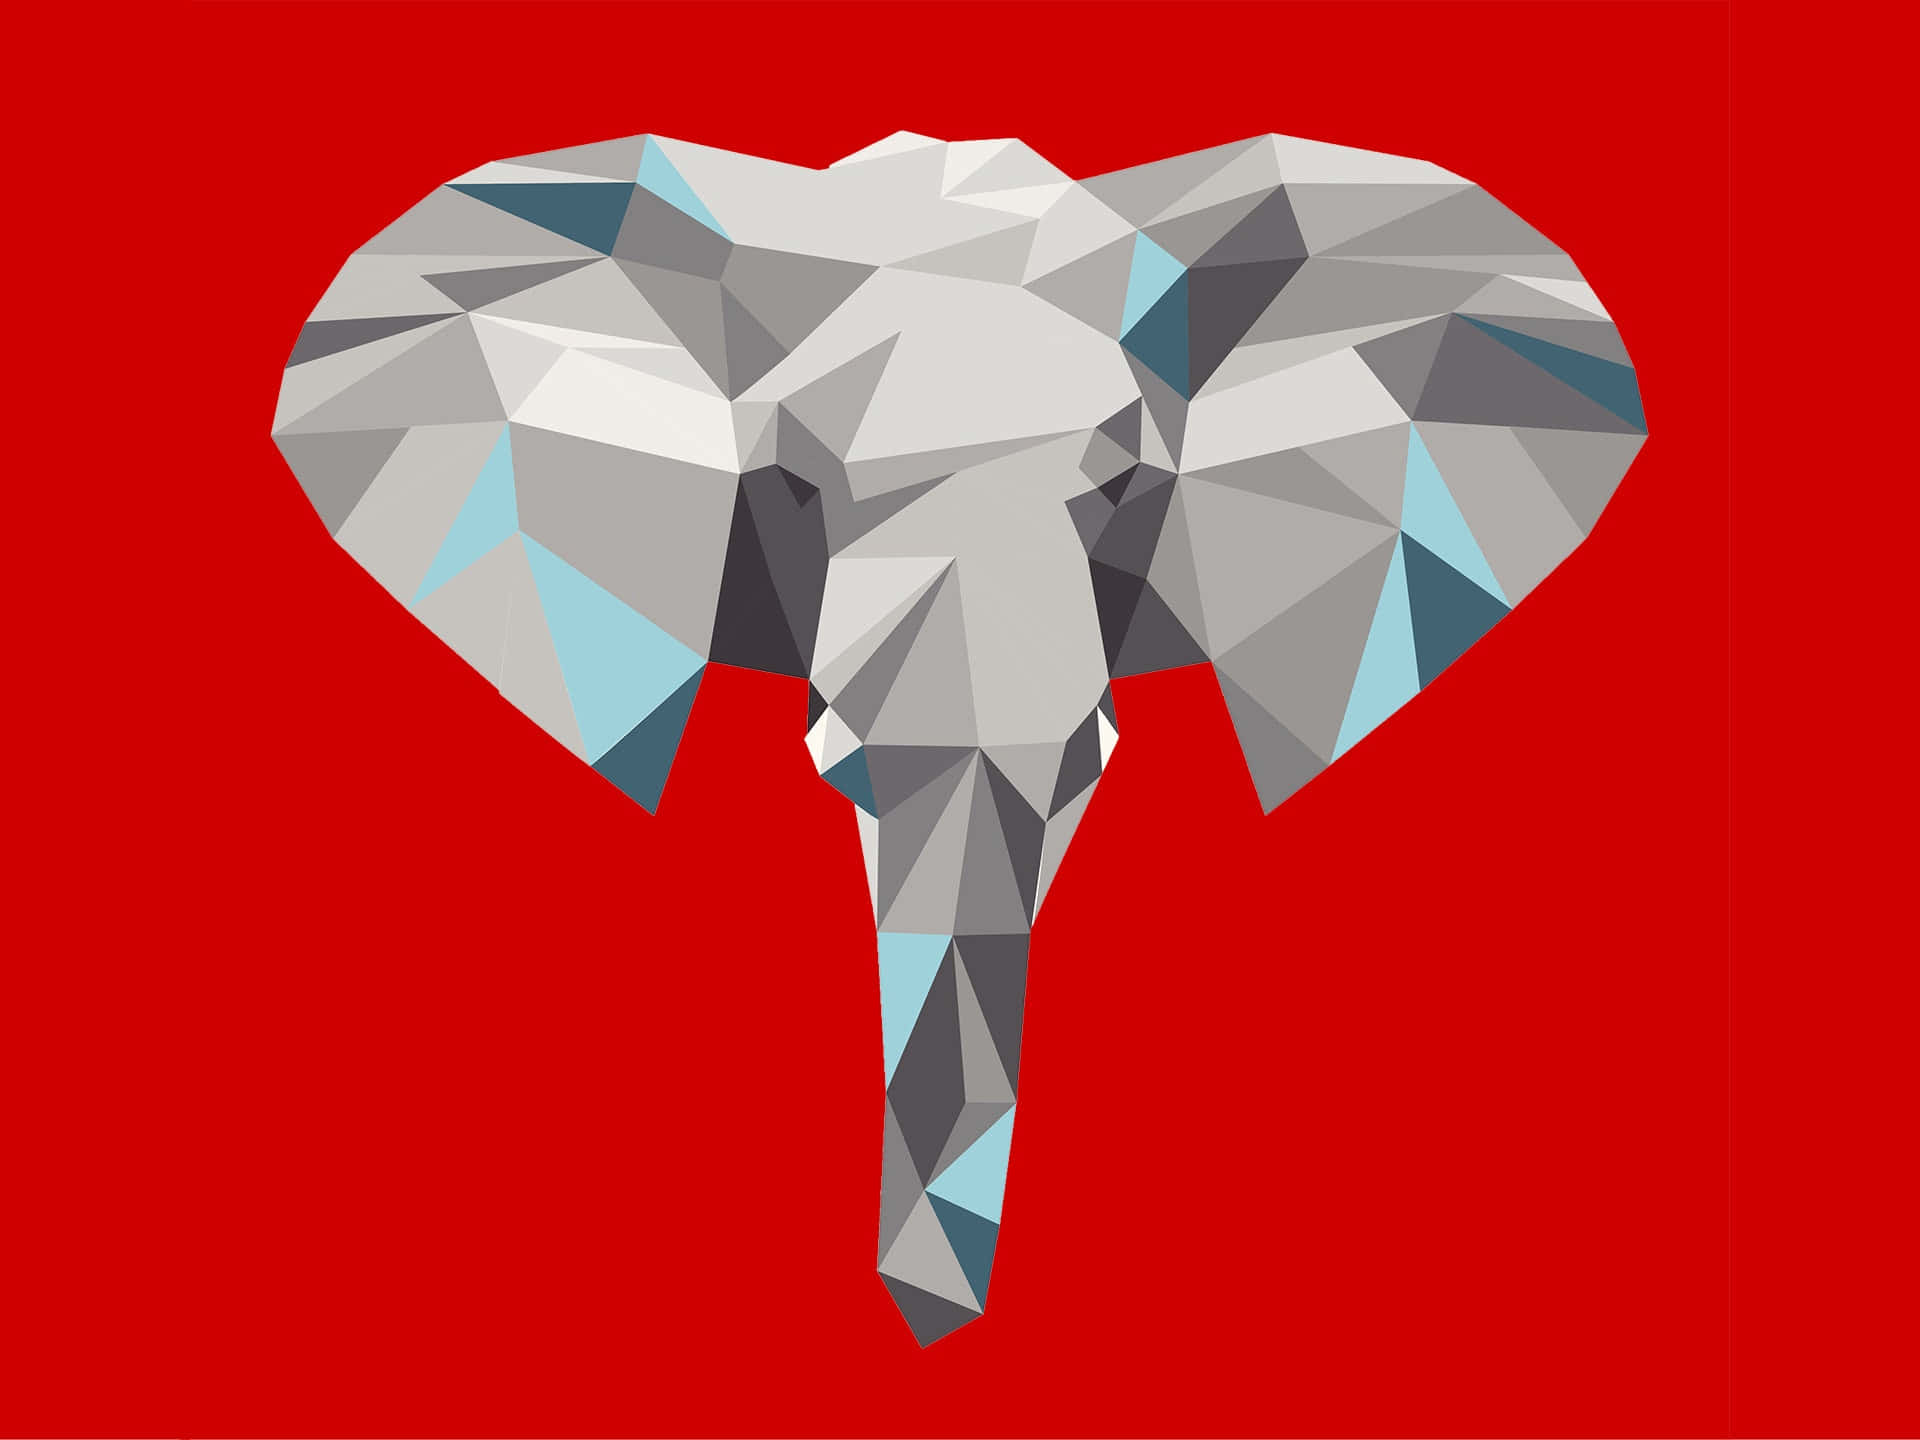 Vector illustration of the head of an elephant, the animal commonly used to represent the Republican Party